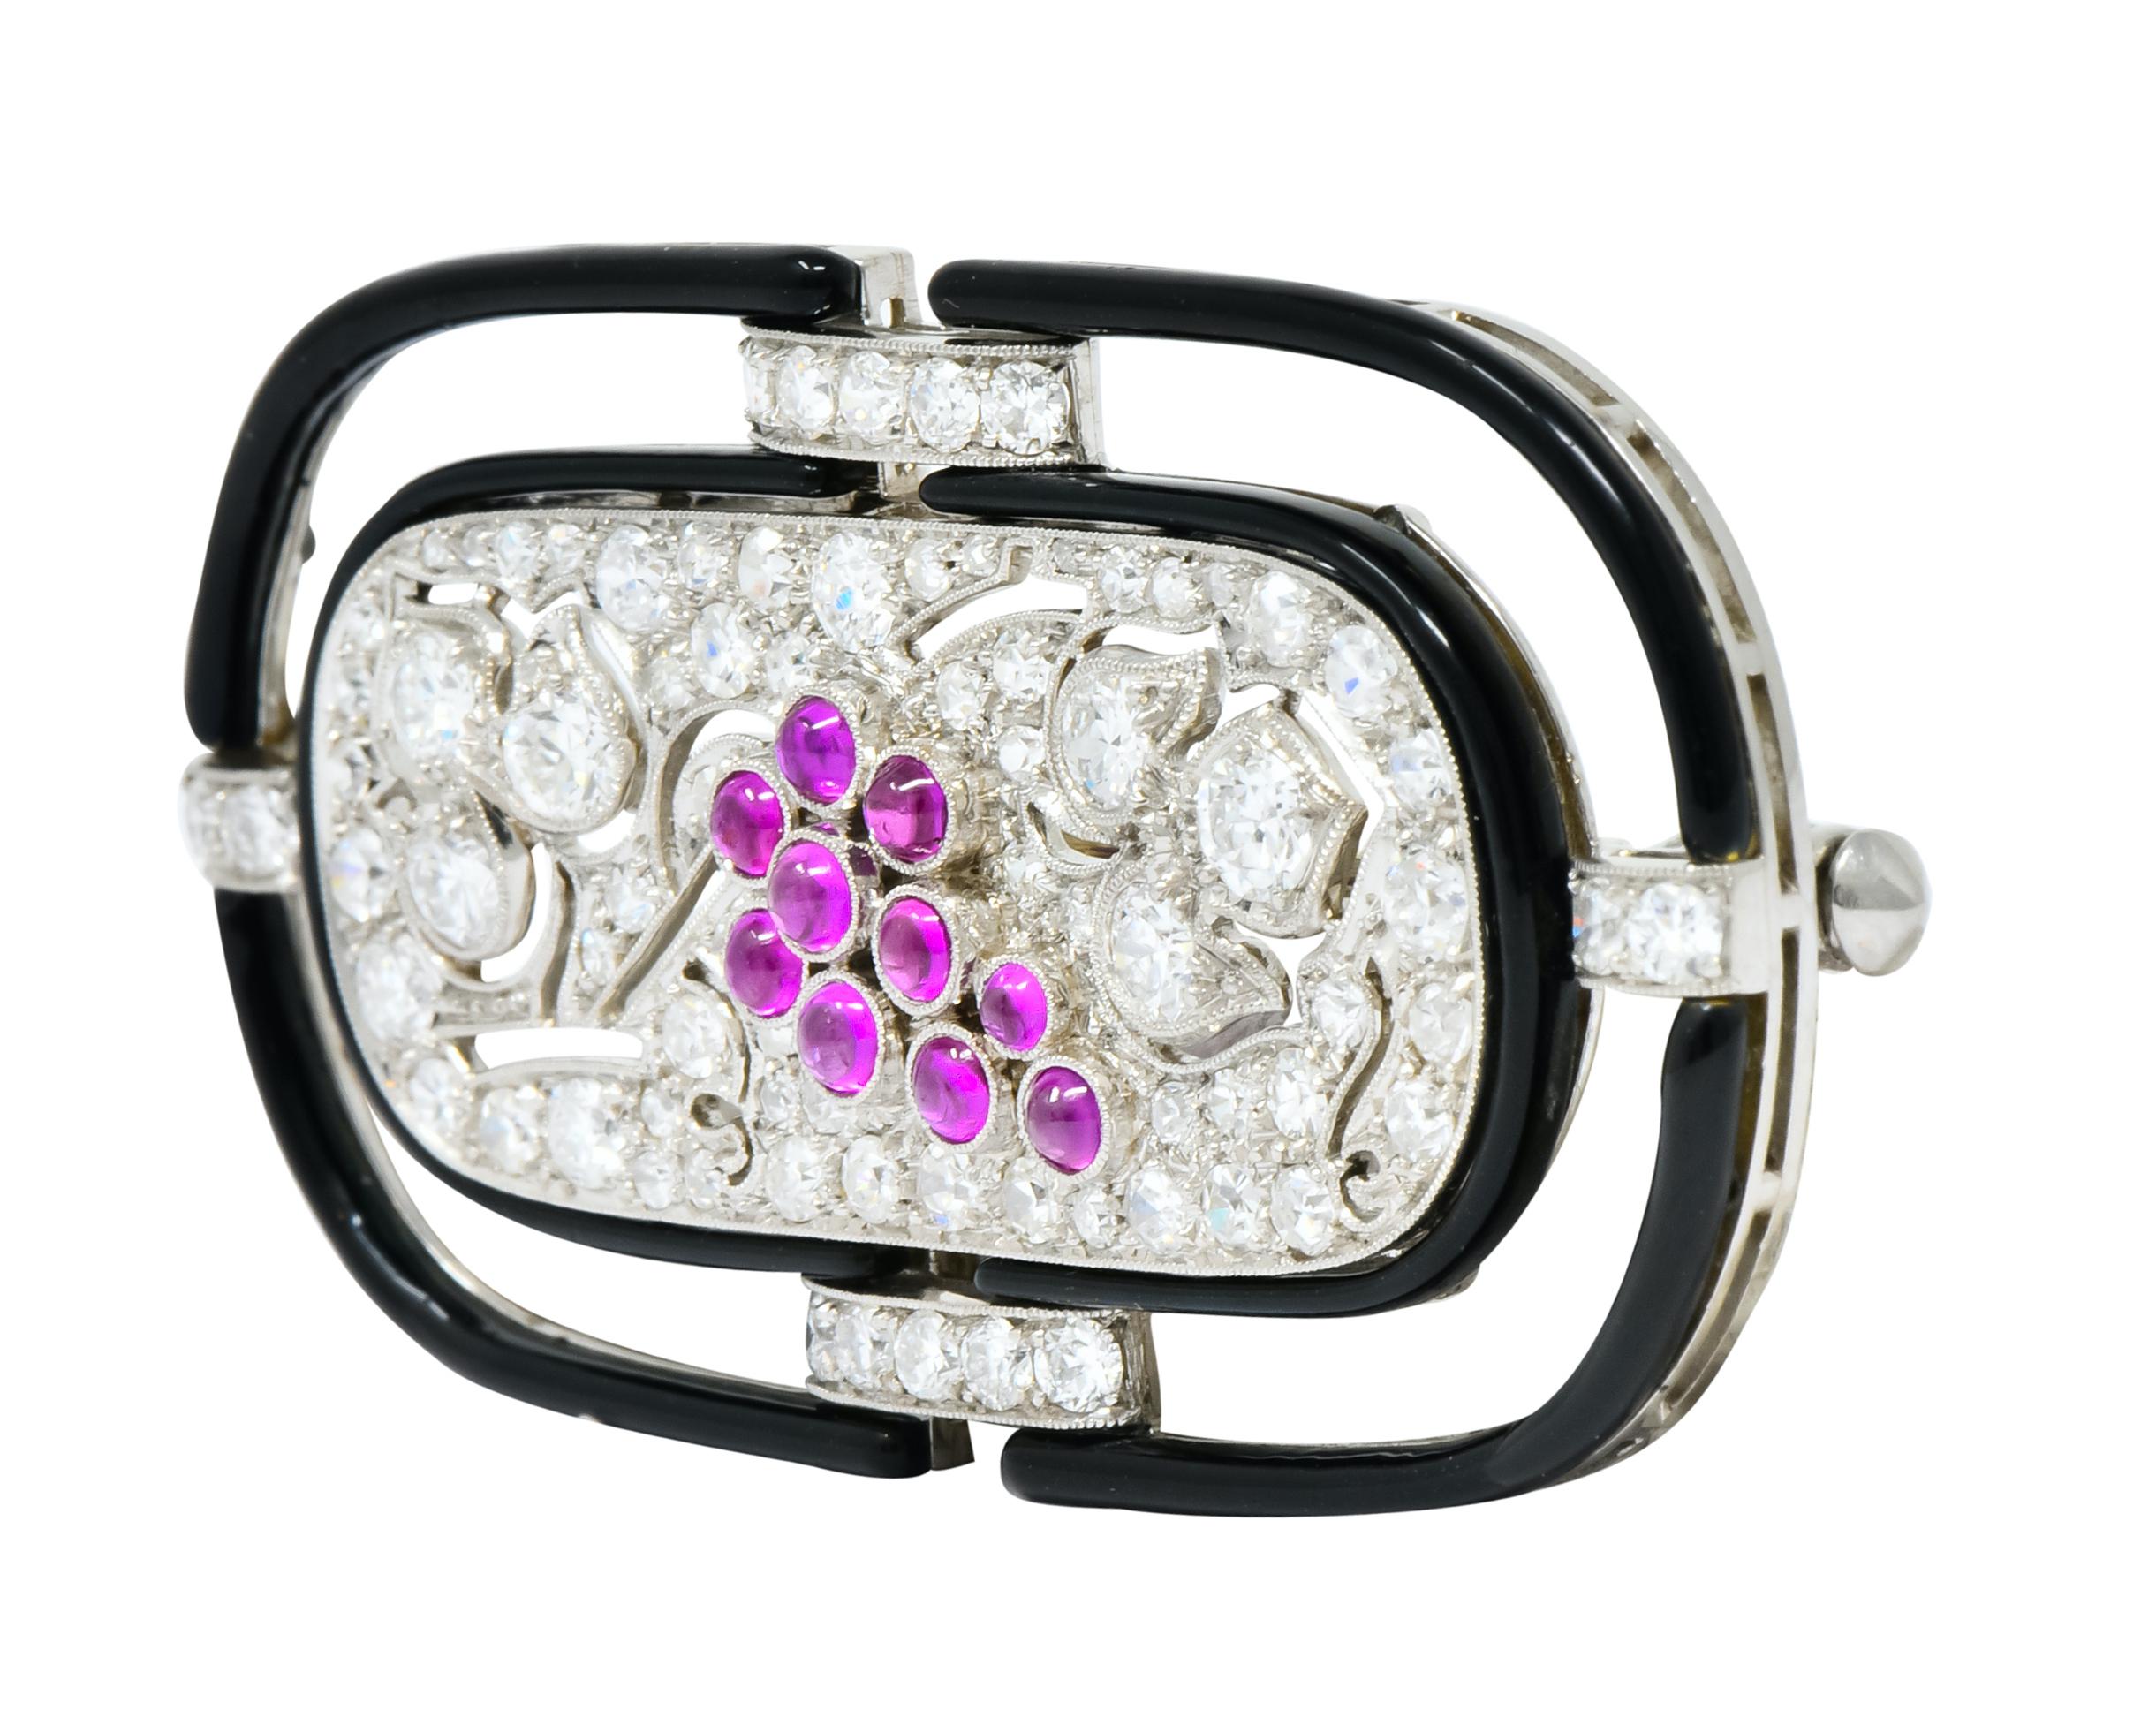 Designed as an oblong platinum brooch featuring round brilliant cut diamonds bead set throughout, weighing approximately 1.80 carats total, E/F color and VS clarity

With 10 bezel set ruby cabochons in a grape cluster motif, deep pinkish hue and